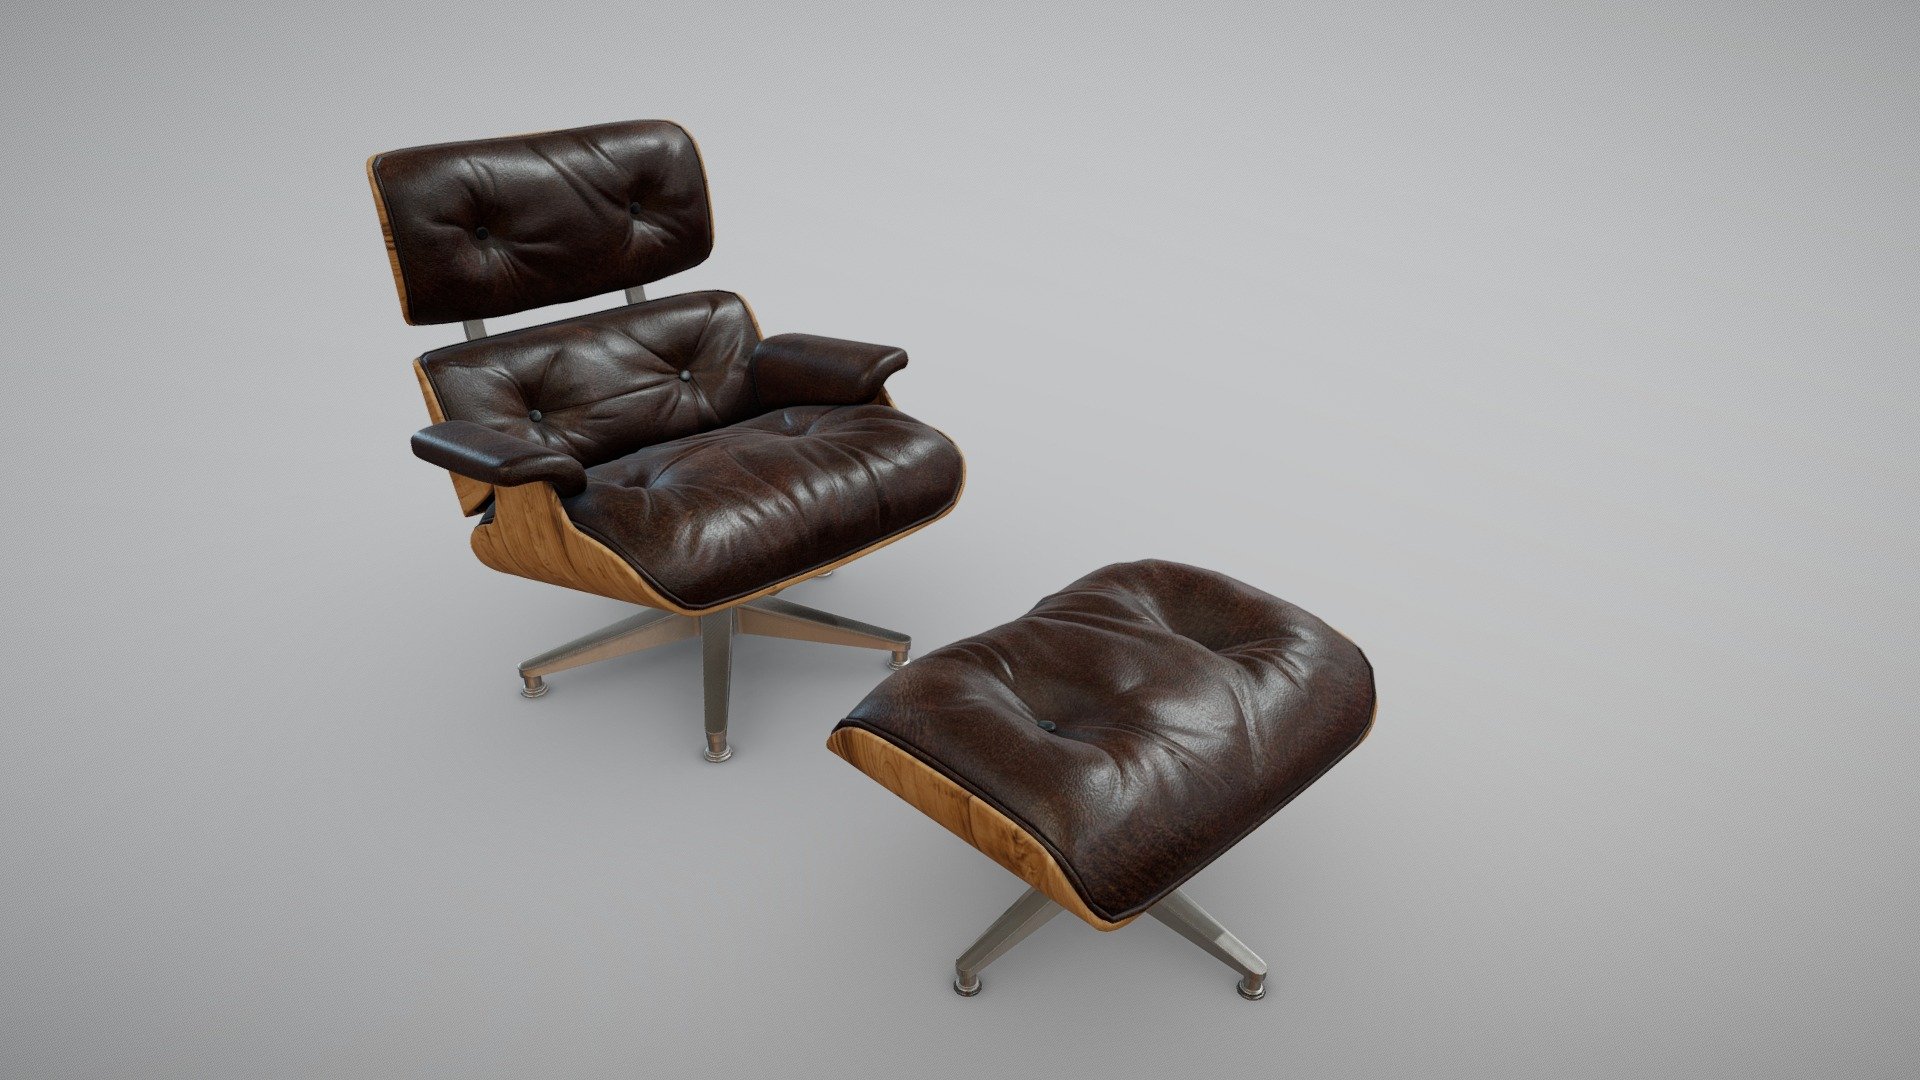 VITRA Lounge Chair model
VR and game ready for high quality Architectural Visualization - VITRA Lounge Chair - 3D model by Invrsion 3d model